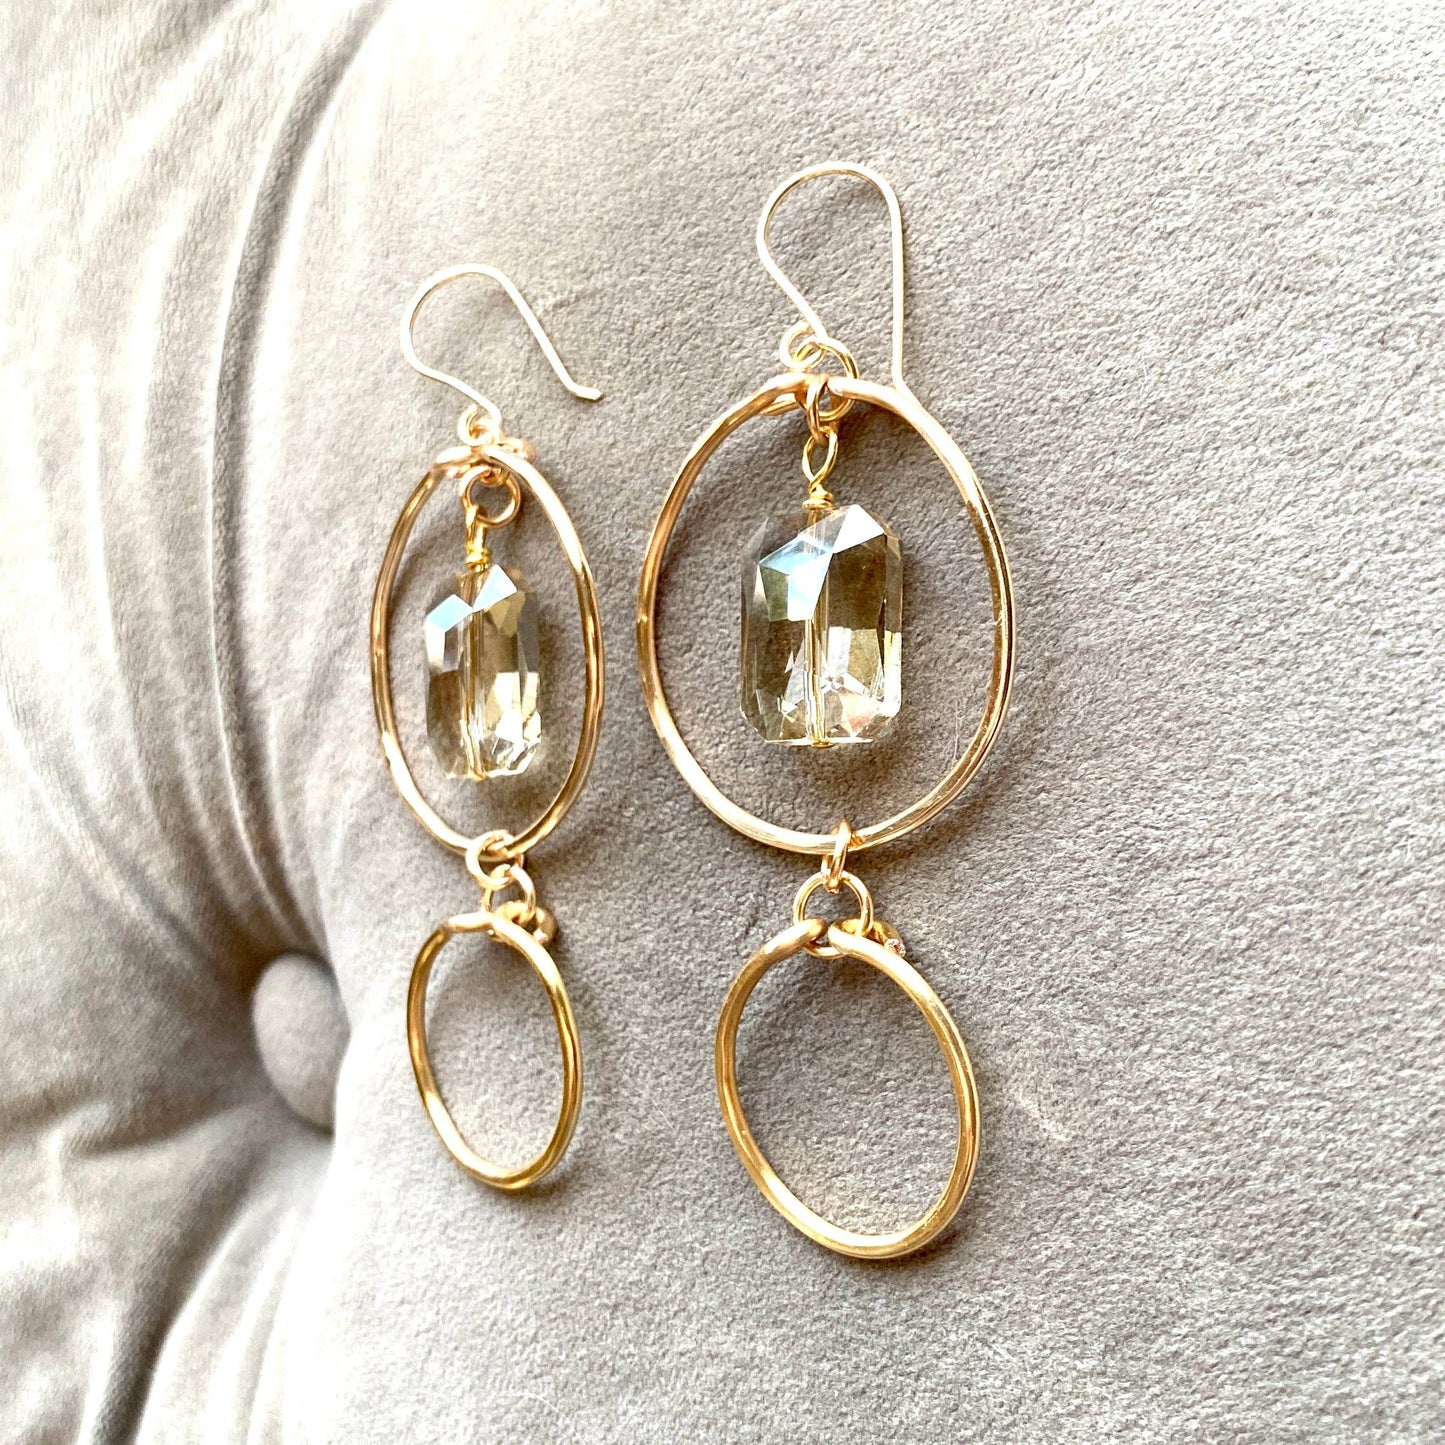 Marble Designs Jewelry - Gold Hammered Double Hoop Earrings with Champagne Crystal: Champagne